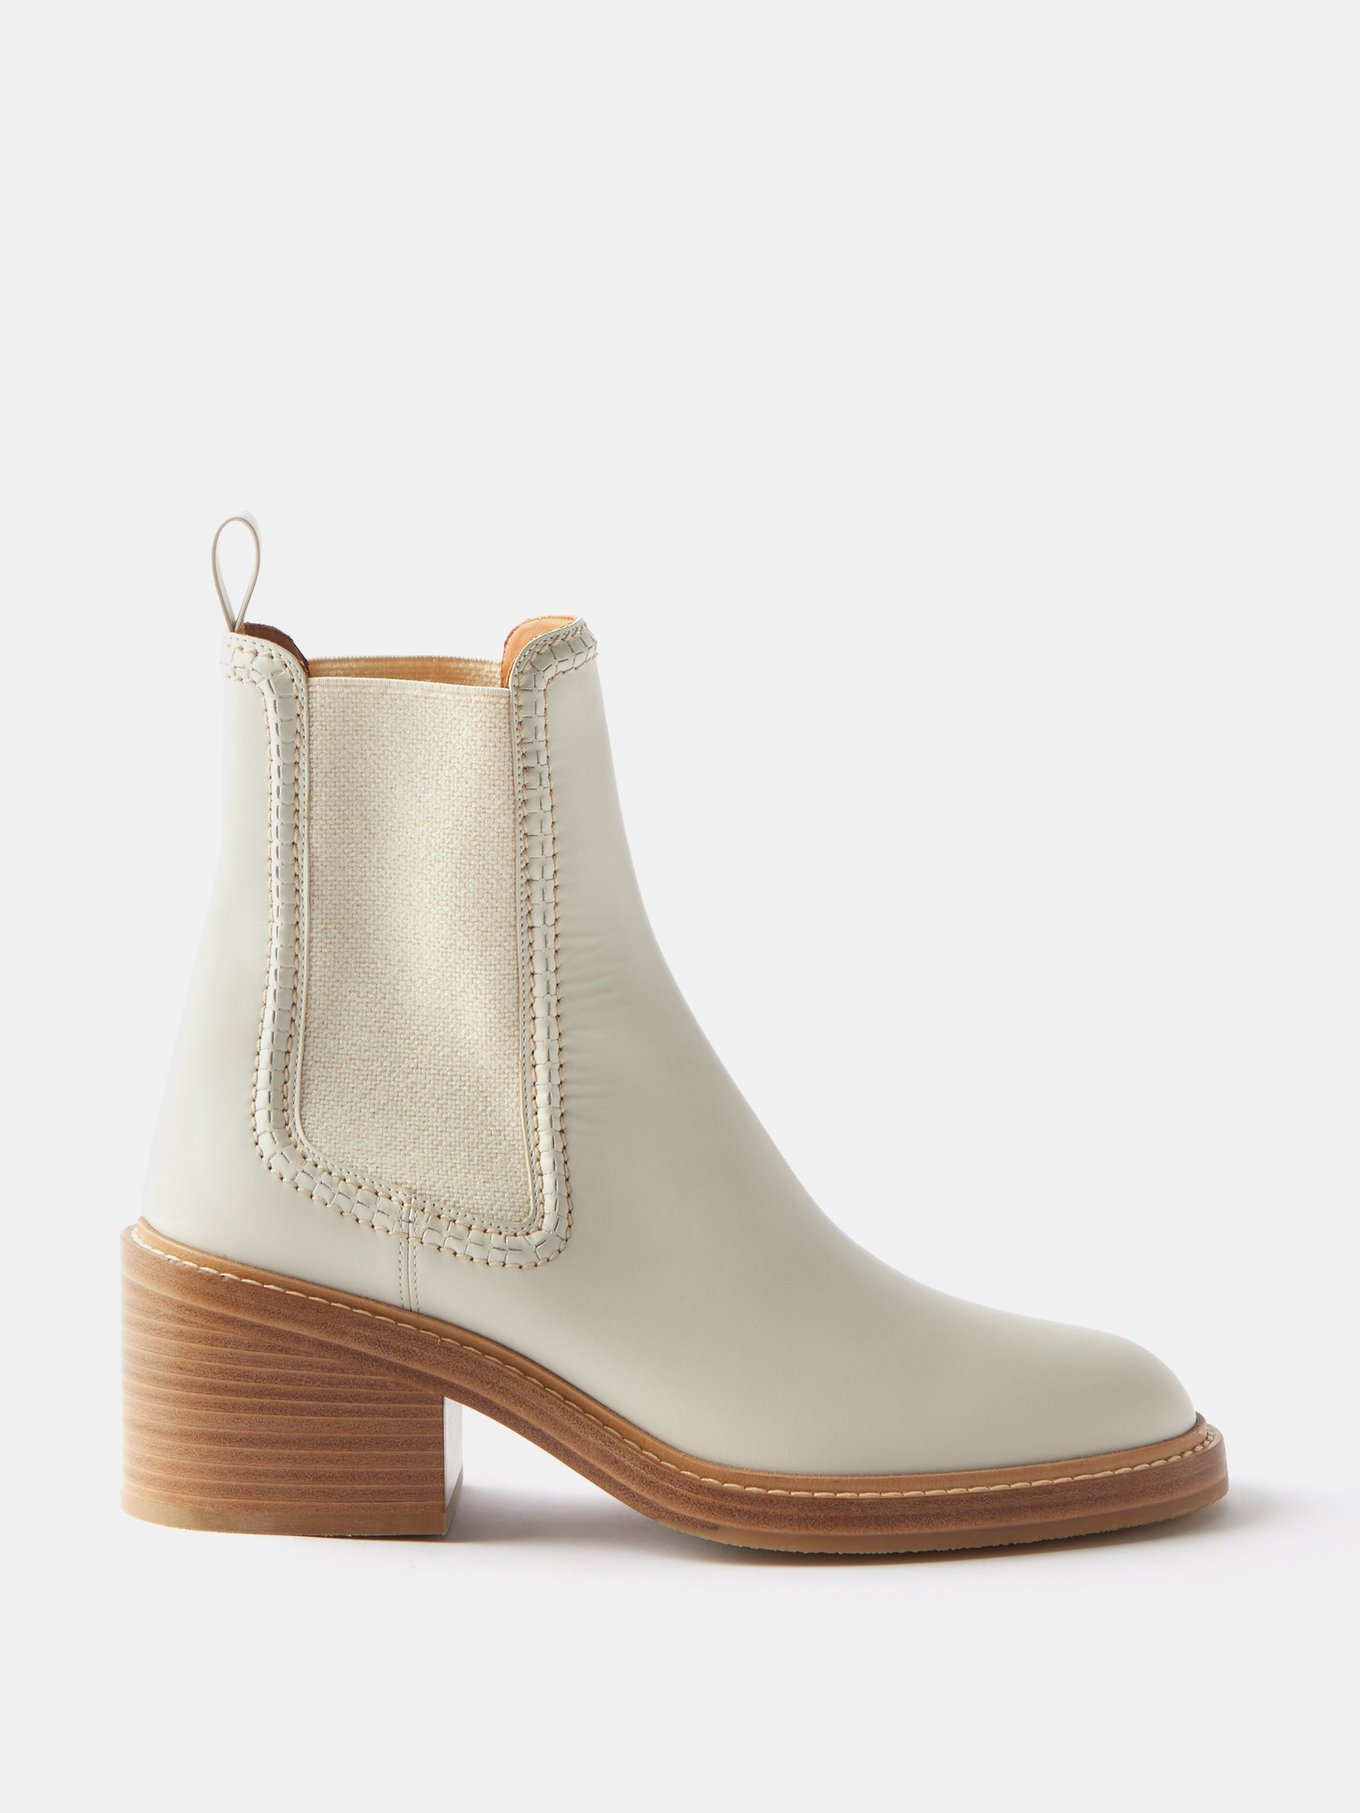 Bedre at styre Dekorative White Mallo 50 leather Chelsea boots | Chloé | MATCHESFASHION US